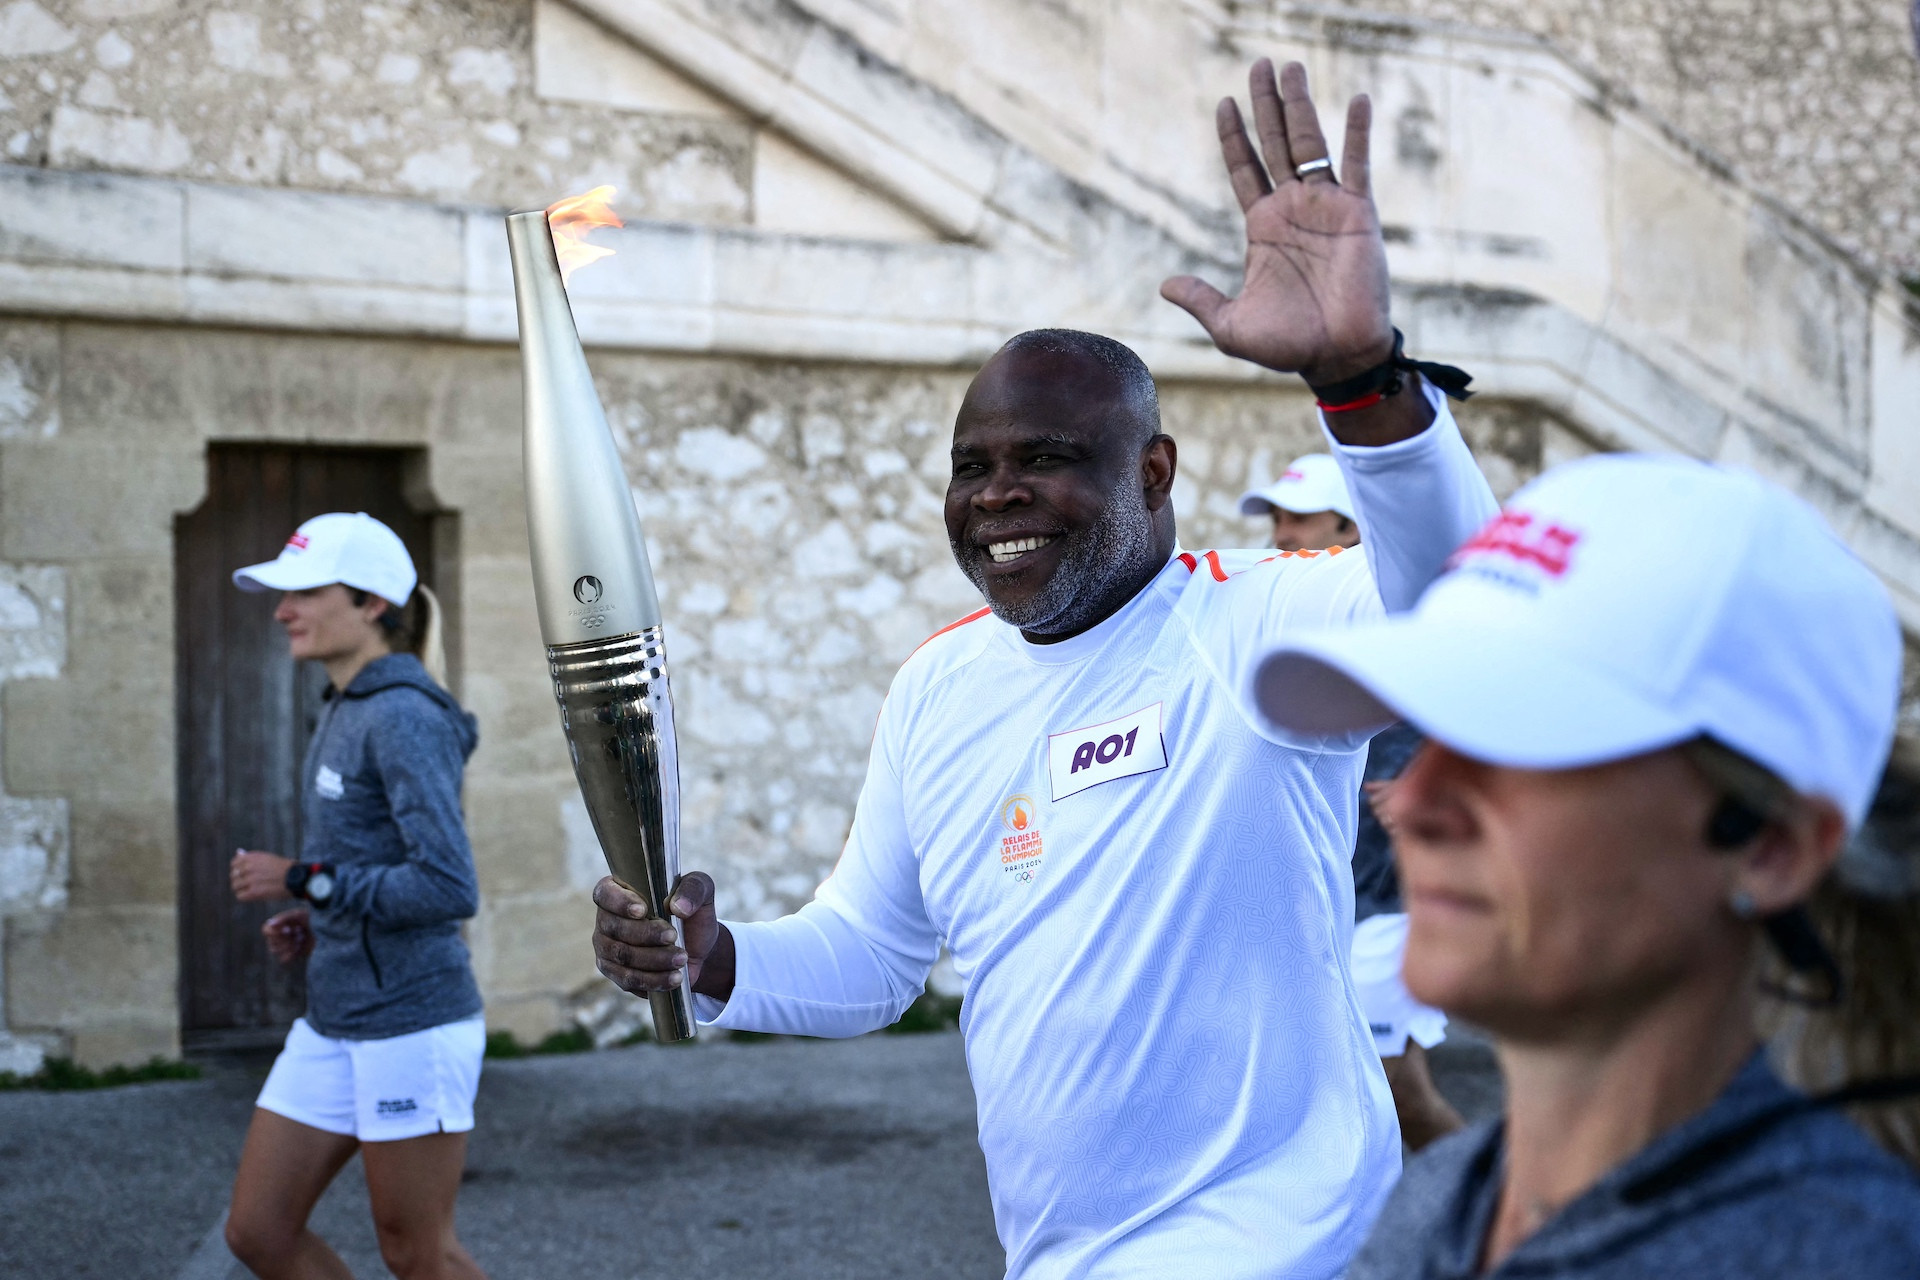 The Olympic Torch is making its way through France. Here former football player Basile Boli takes part of the relay. GETTY IMAGES